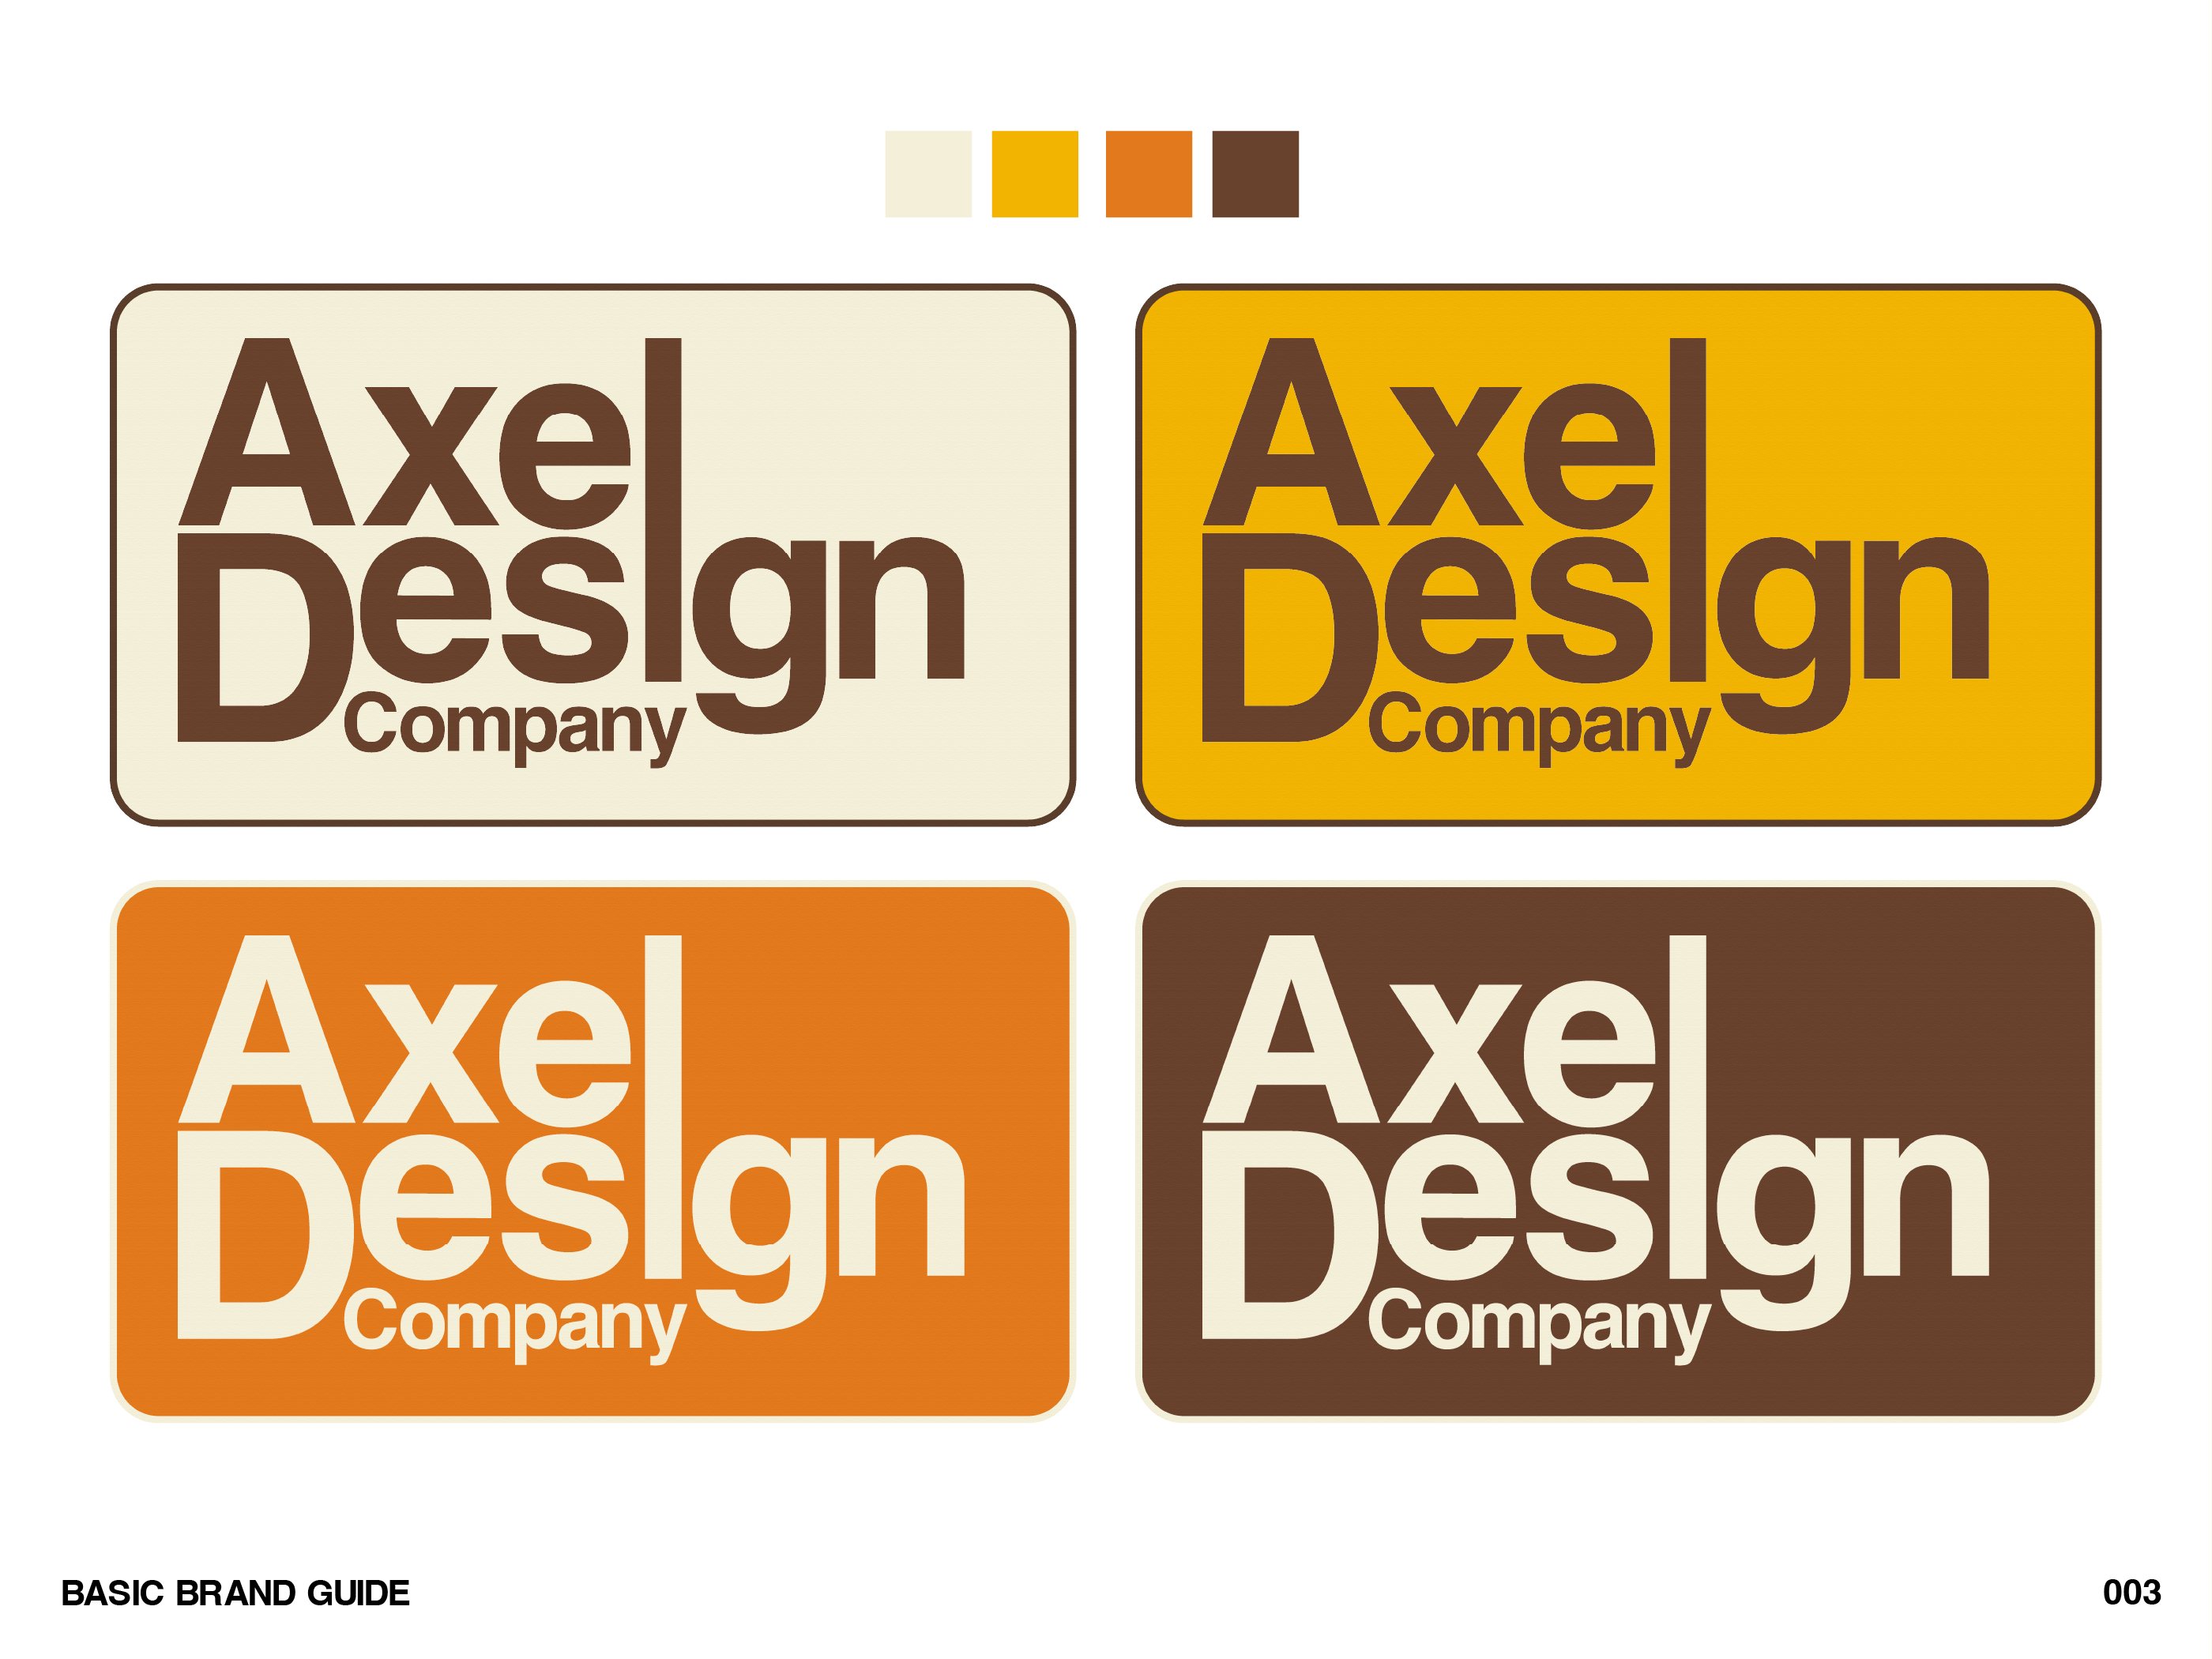 Axel Design Company Basic Brand Guide by Axel Vazquez on Dribbble